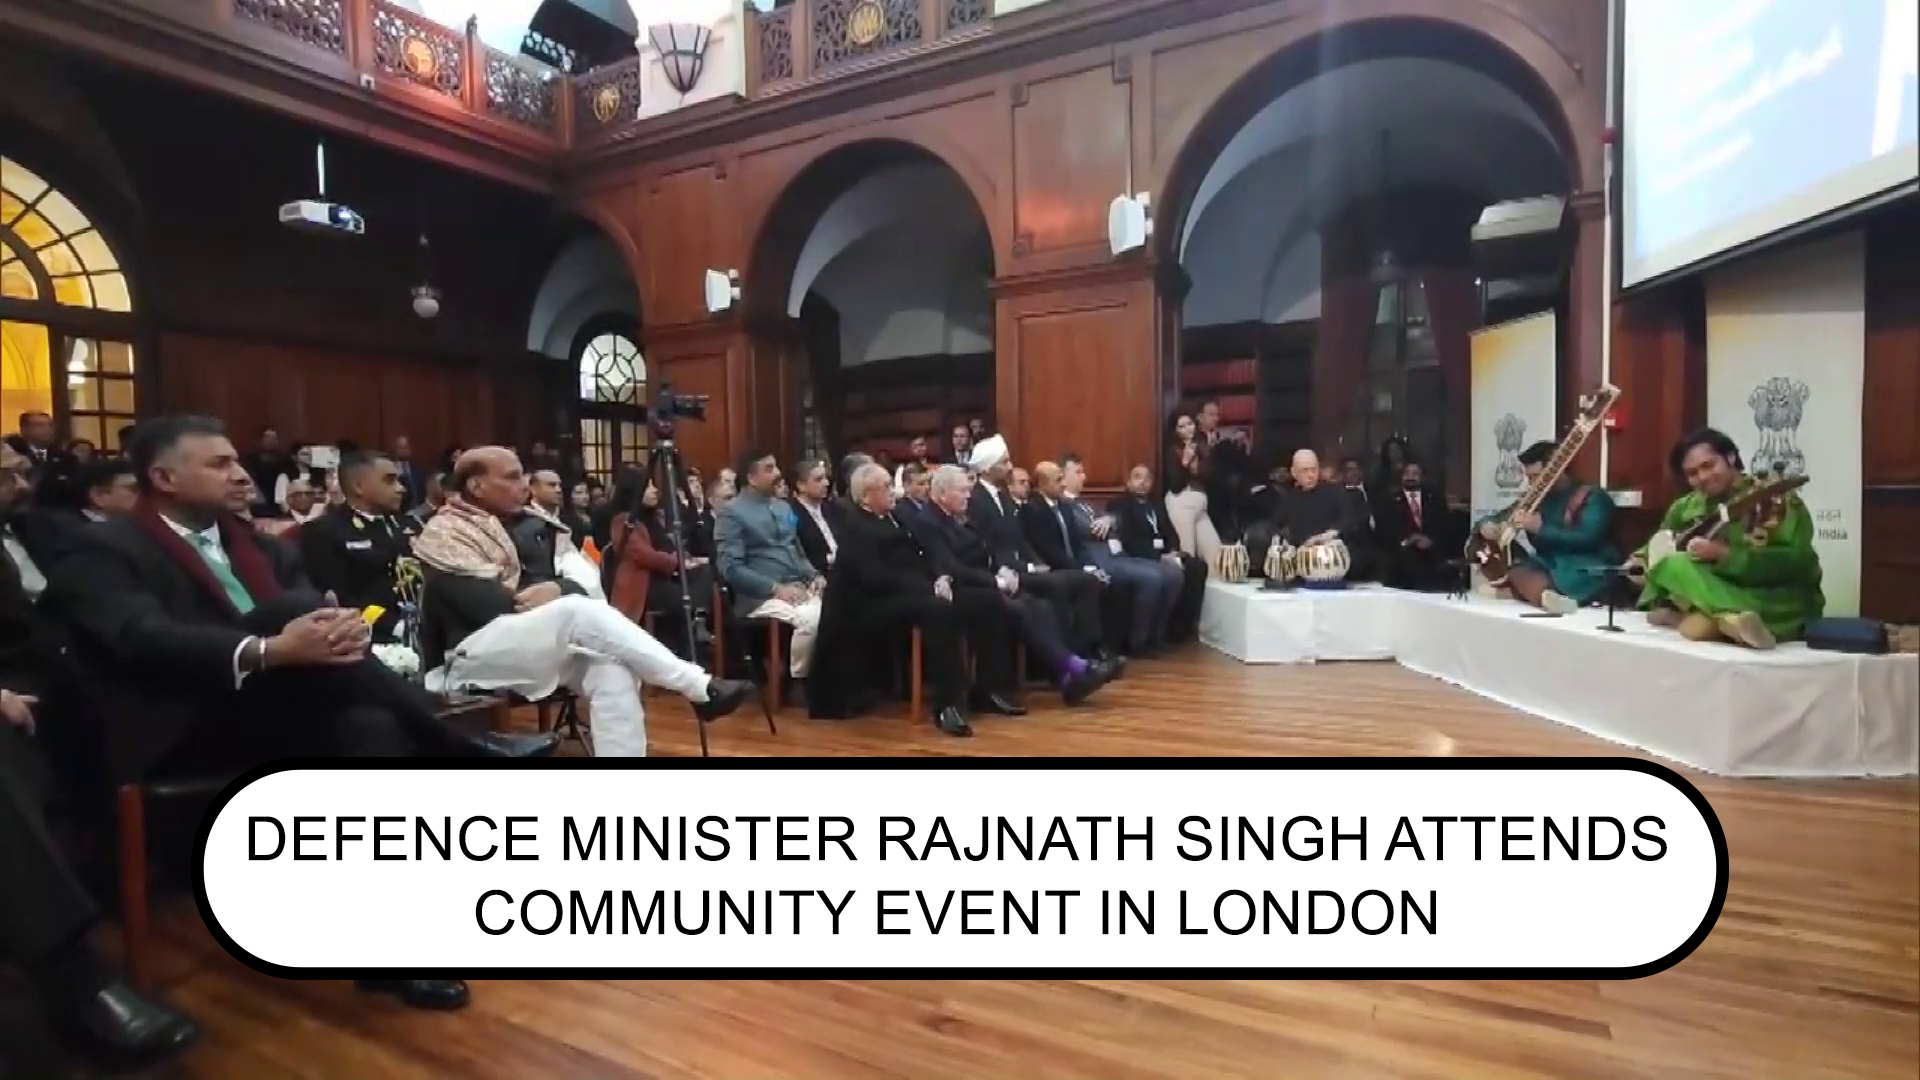 Defence Minister Rajnath Singh attends community event in London